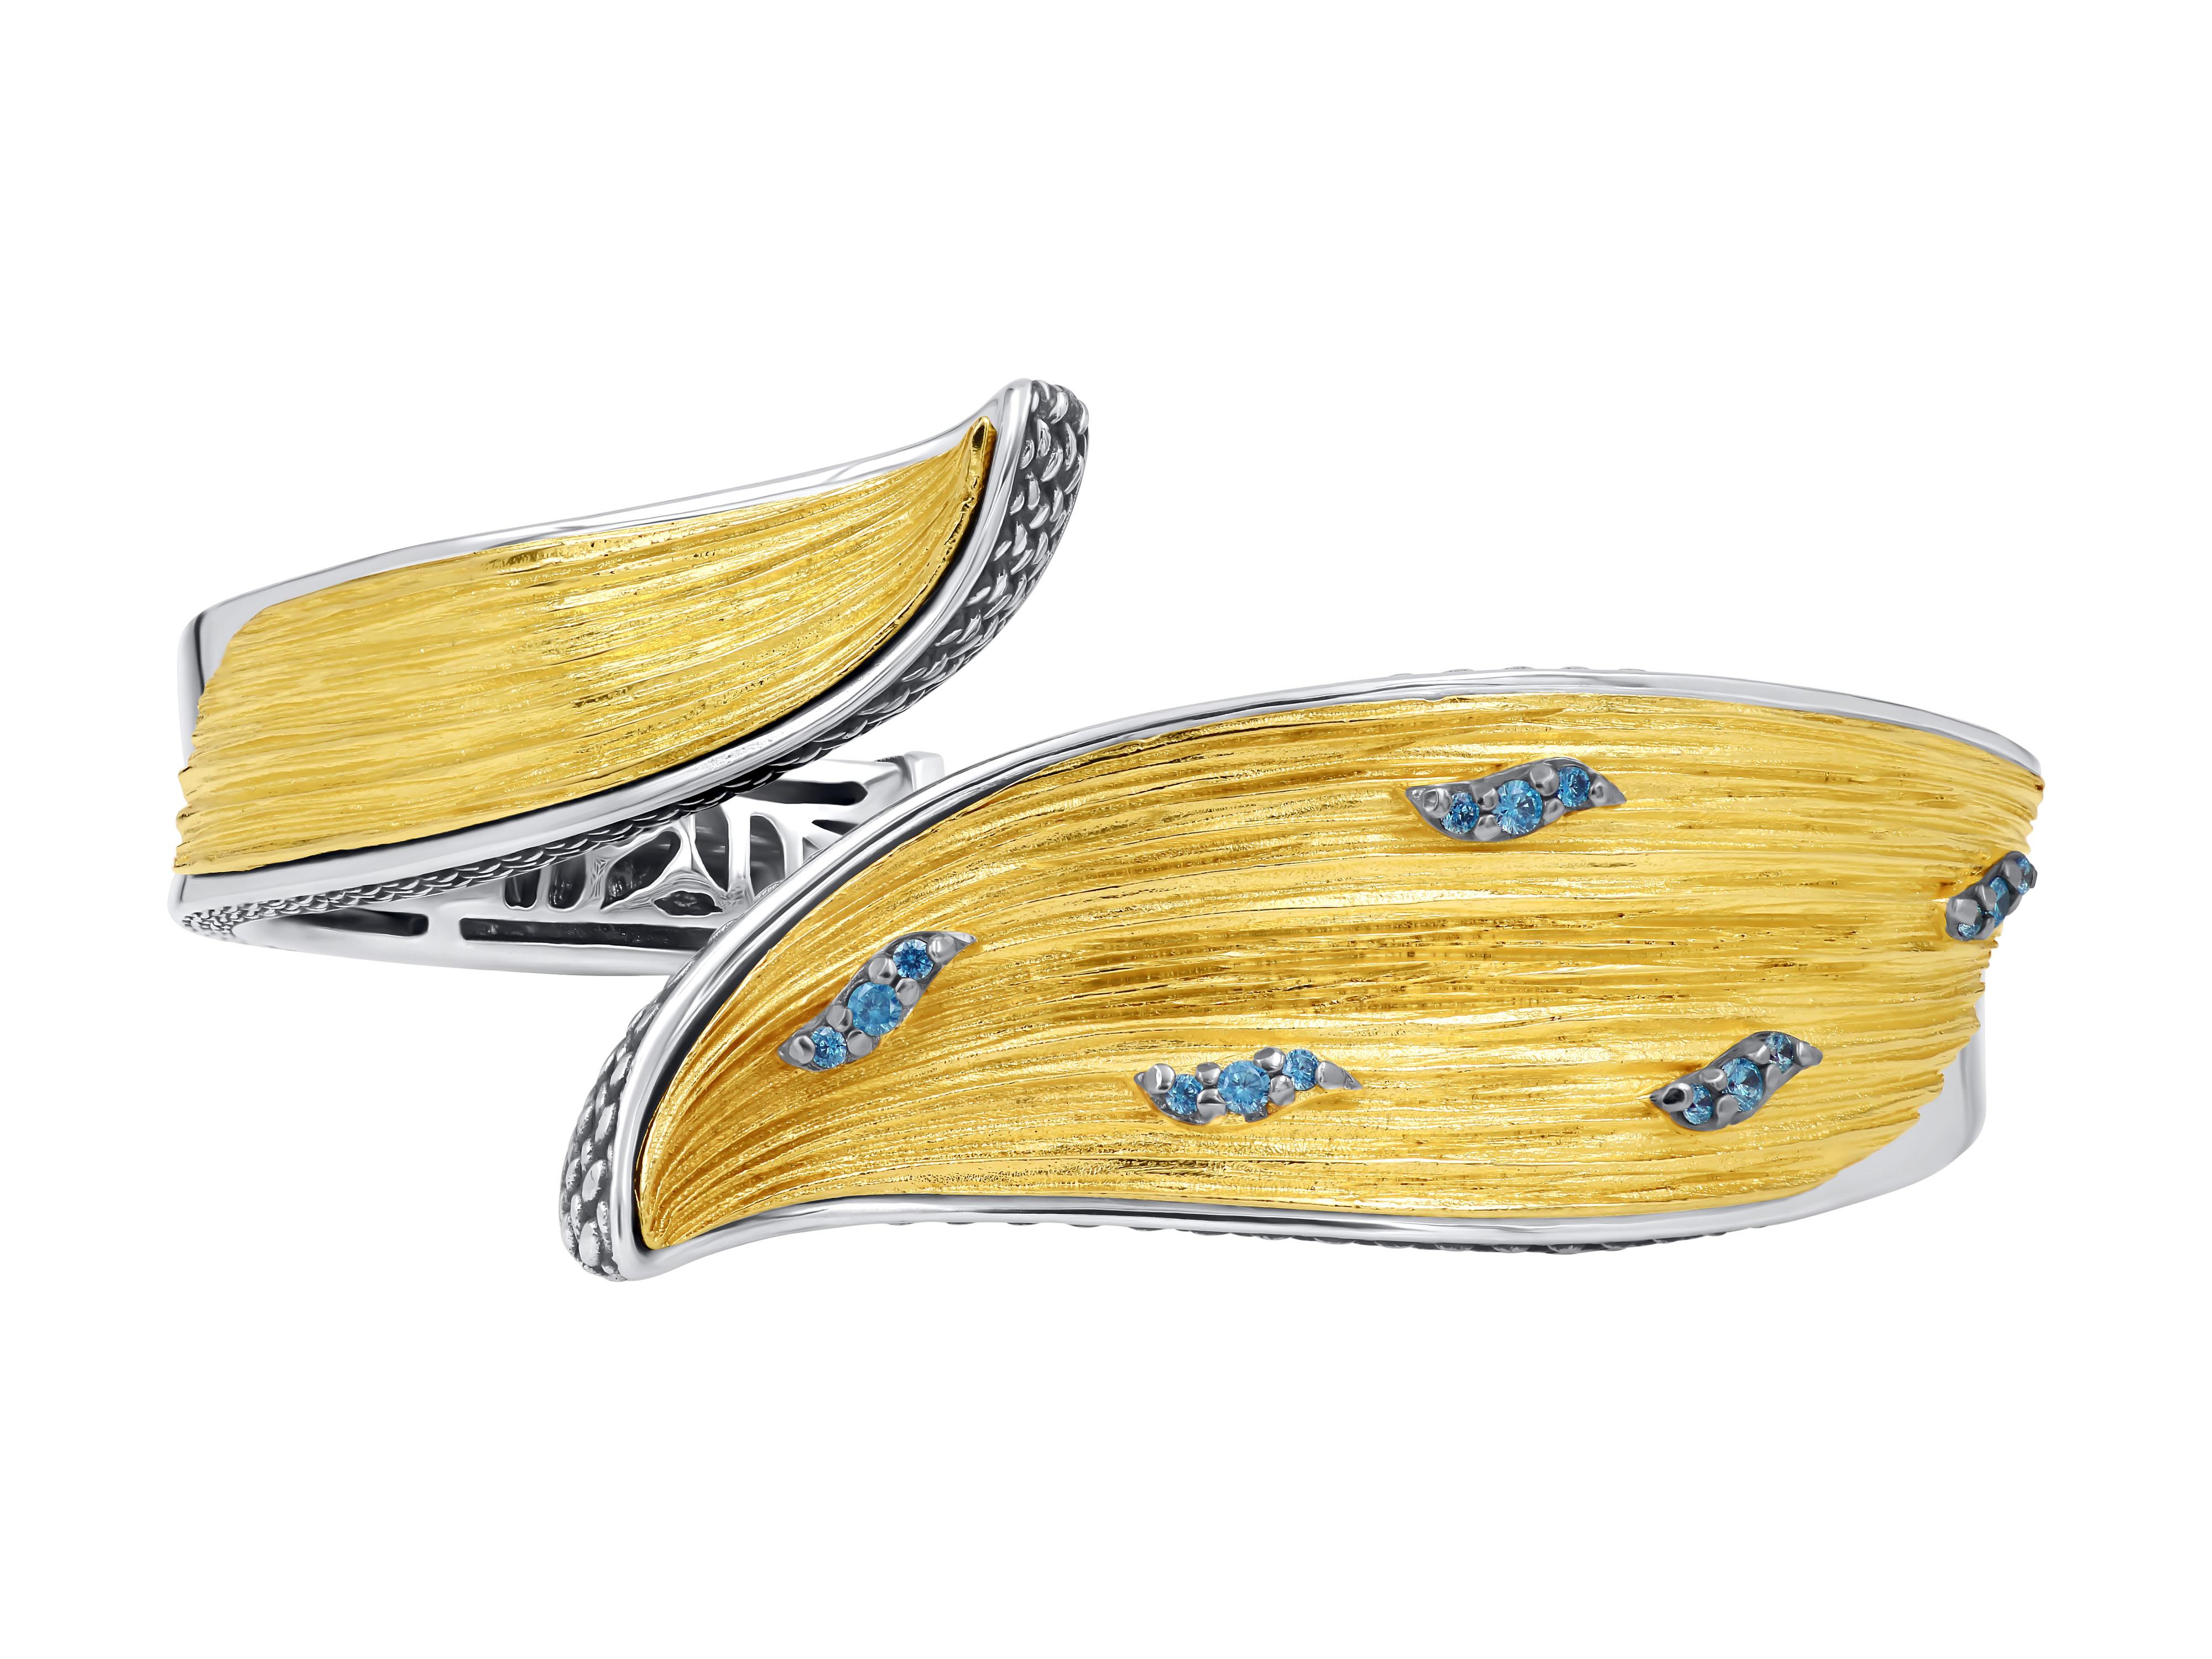 Silver two-tone bangle bracelet with gold plated textured surface and adorned with blue topaz stones. This stunning piece of jewelry combines the elegance of silver with the beauty of blue topaz to create a unique and eye-catching design.
The